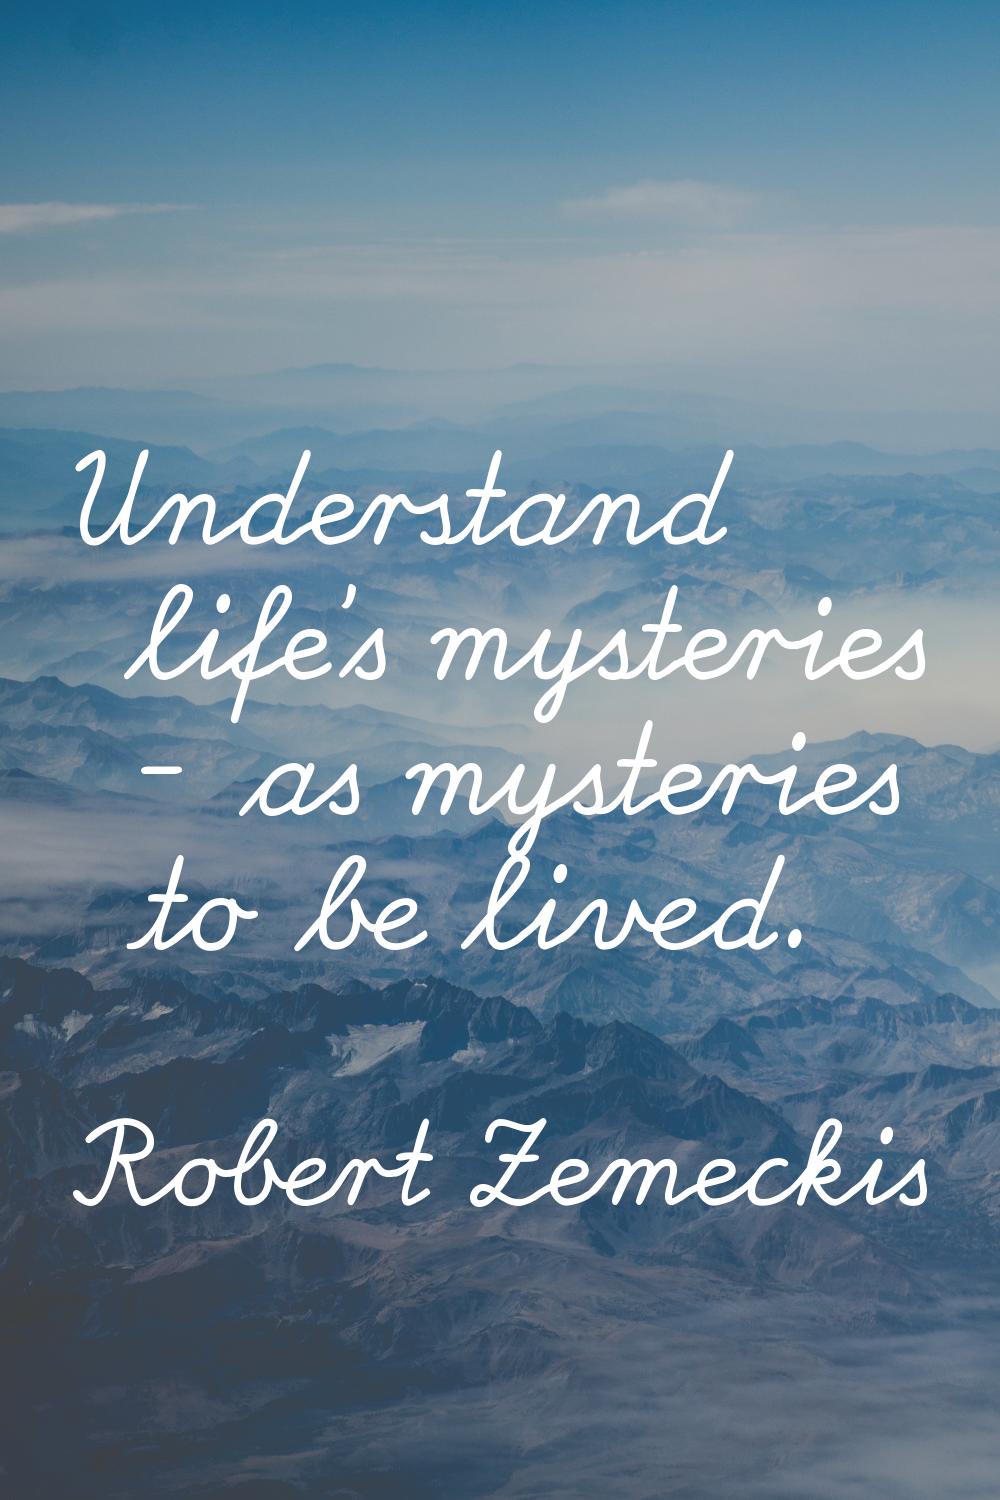 Understand life's mysteries - as mysteries to be lived.